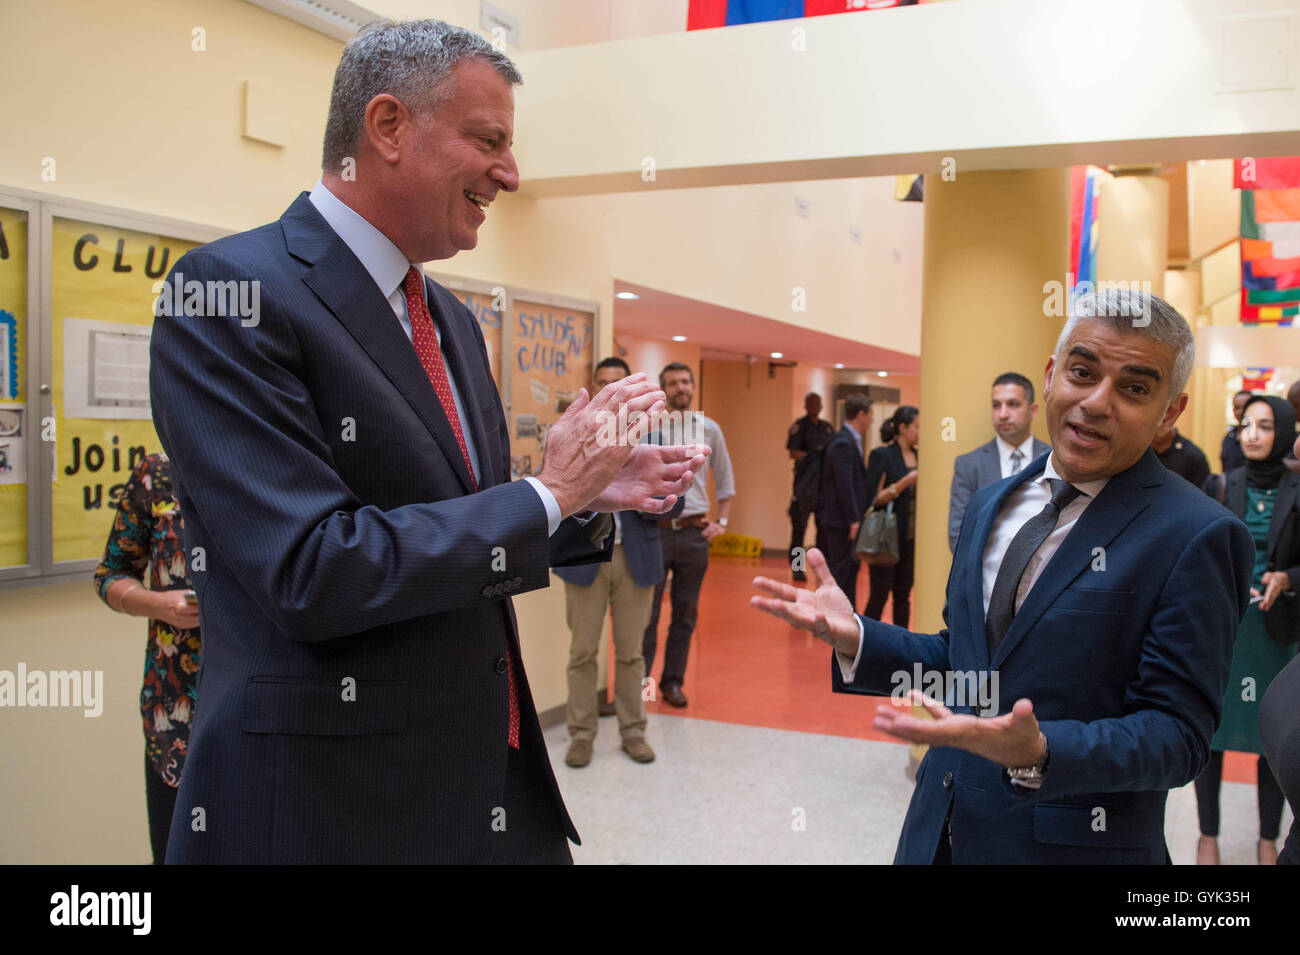 Mayor of London Sadiq Khan (right) meets his New York counterpart Mayor Bill de Blasio to address a Muslim American Community reception with an audience of 100 community leaders at LaGuardia Community College in New York City (NYC) during a three day visit to the US capital as part of his visit to North America. Stock Photo